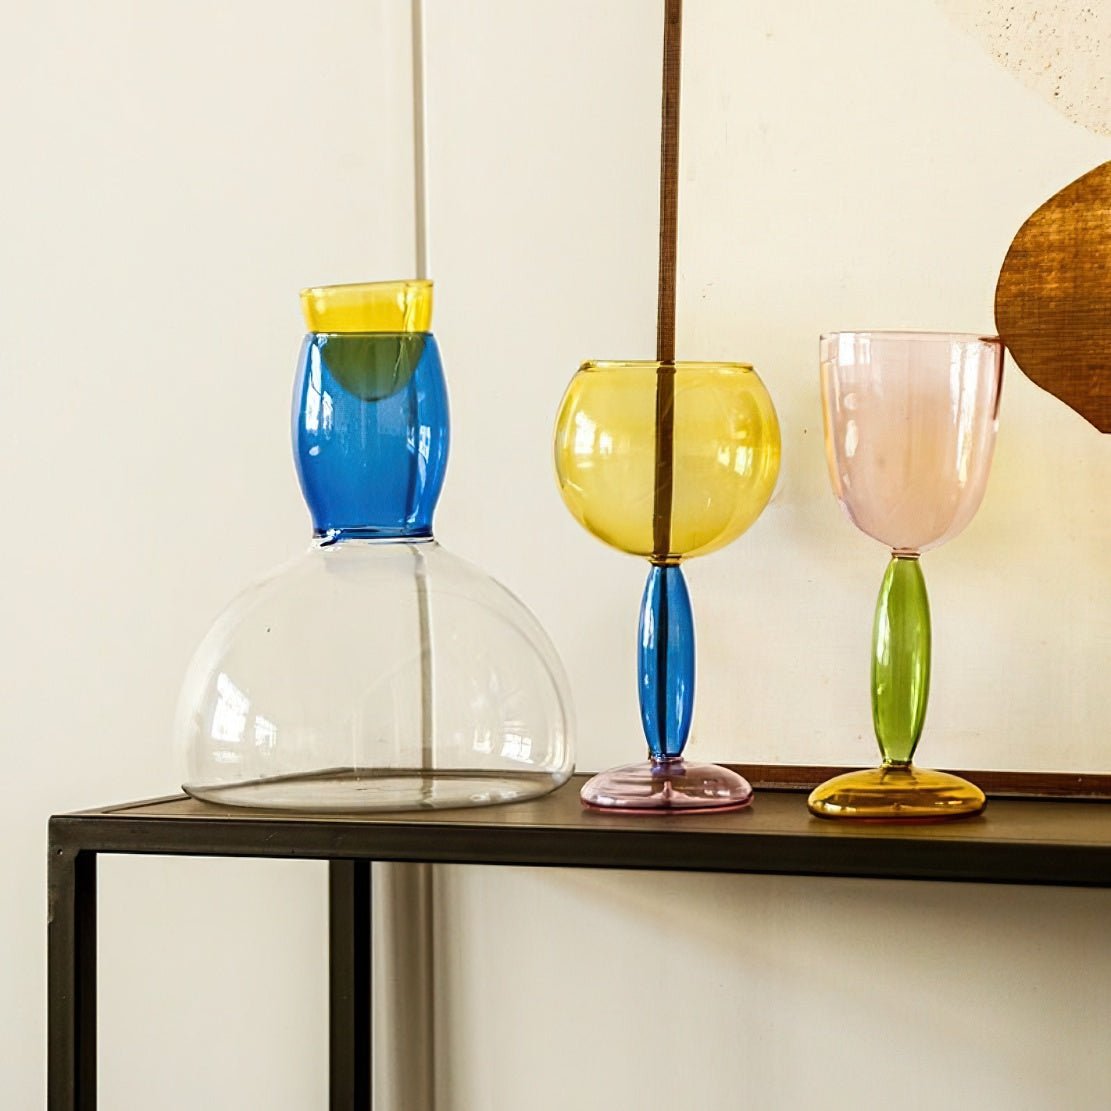 Decorative dining tableware coloured glassware including a can and glass goblets.